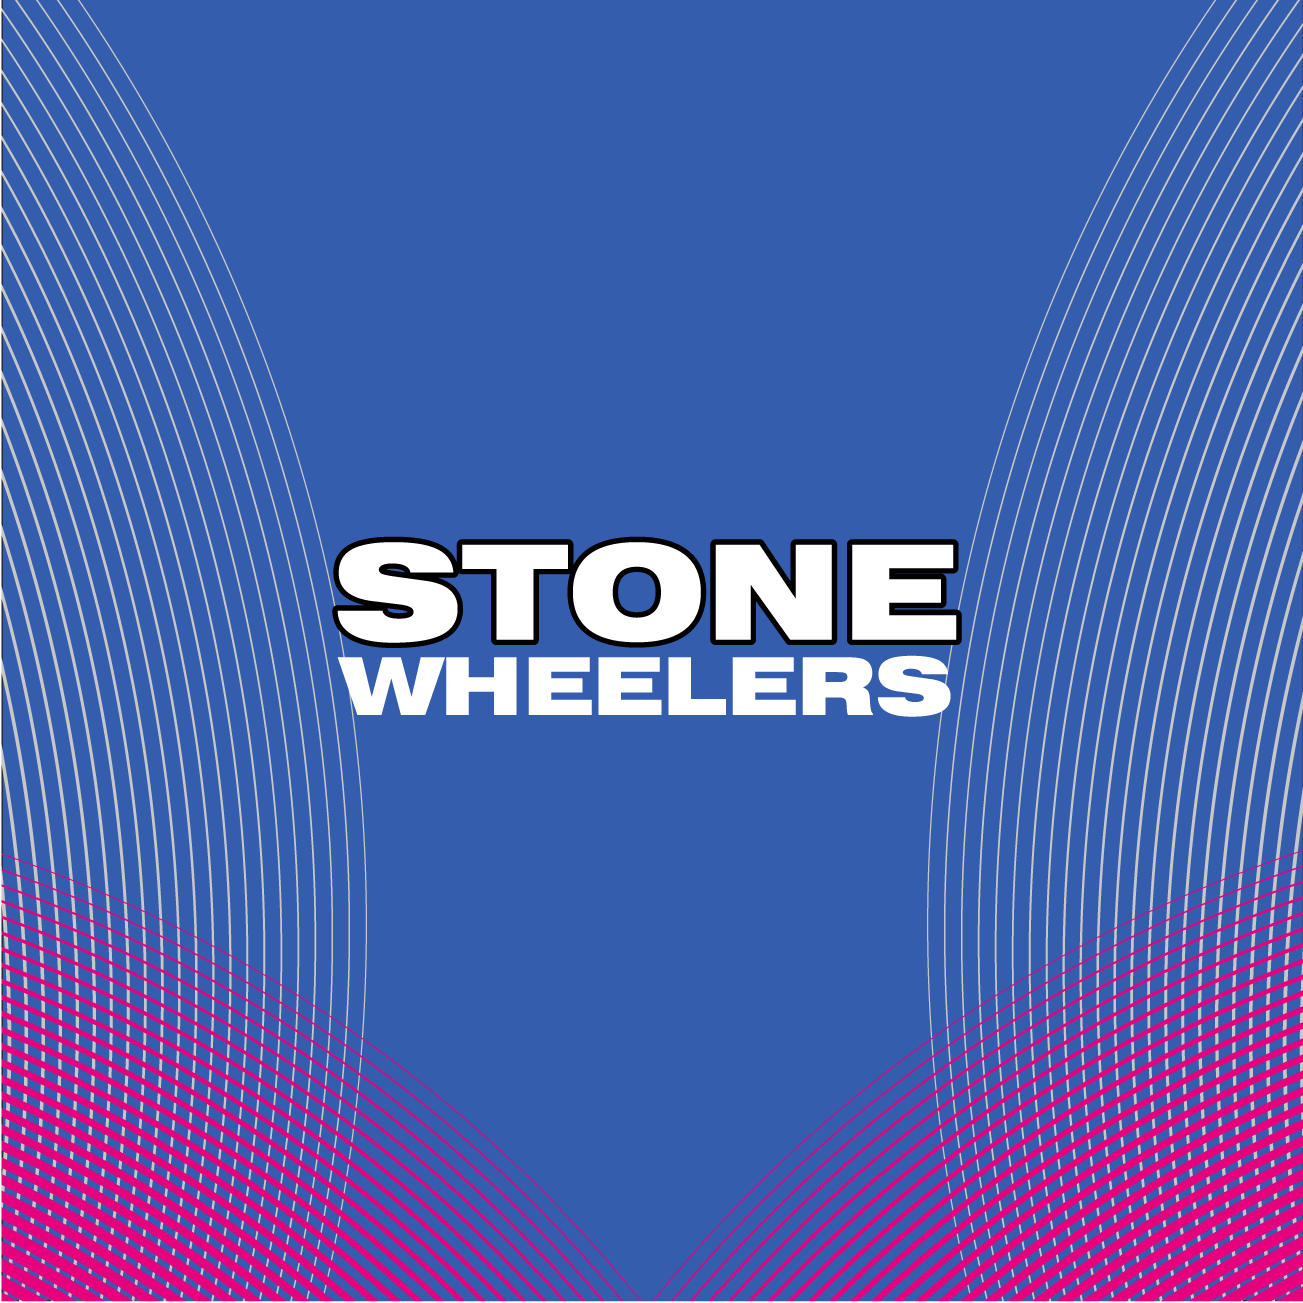 Club Image for STONE WHEELERS